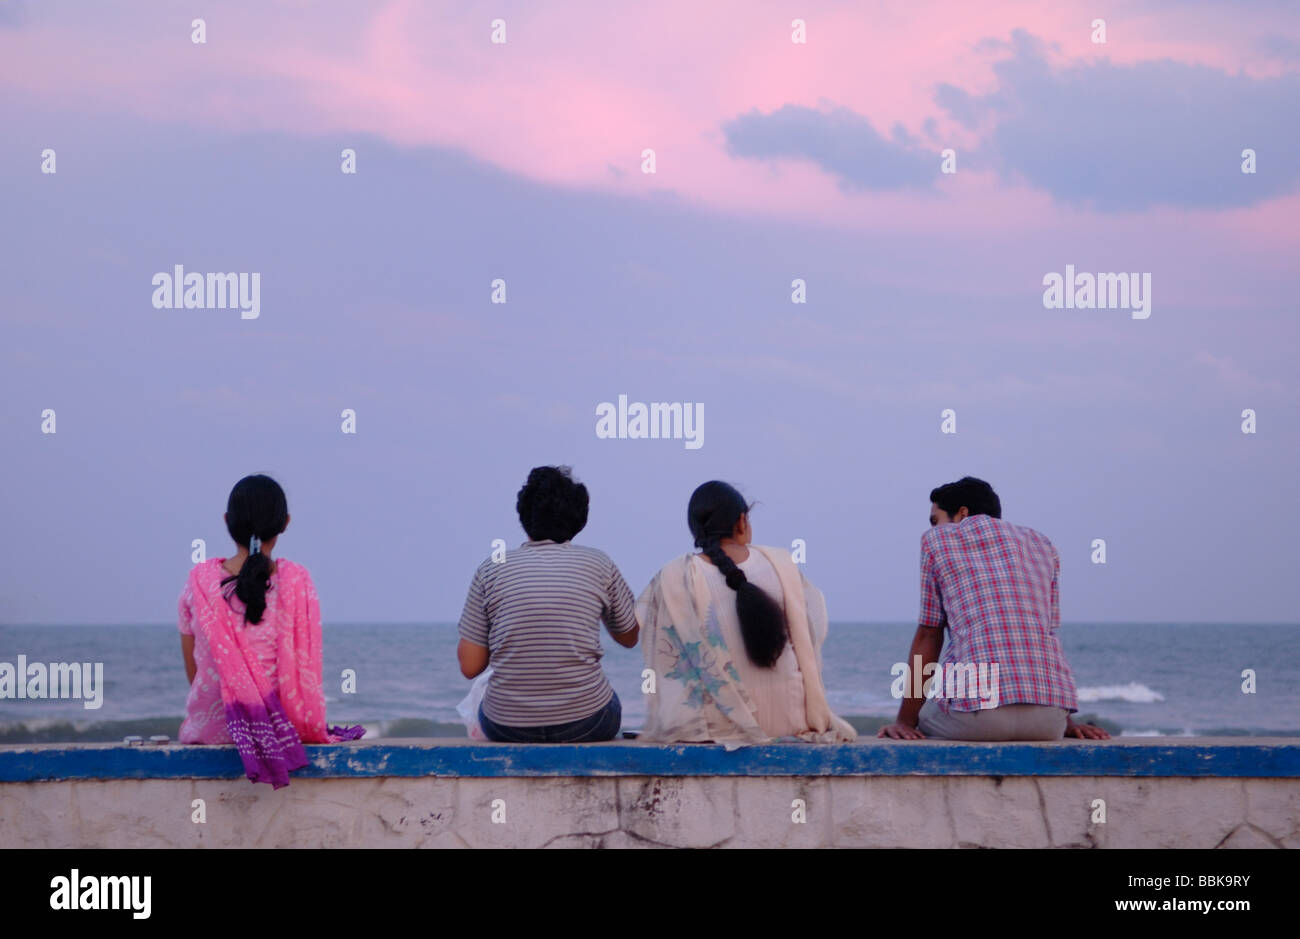 Group of Inadian people relaxing after sunset at Chennai beach. India, Tamil Nadu, Chennai (Madras).  No releases available. Stock Photo